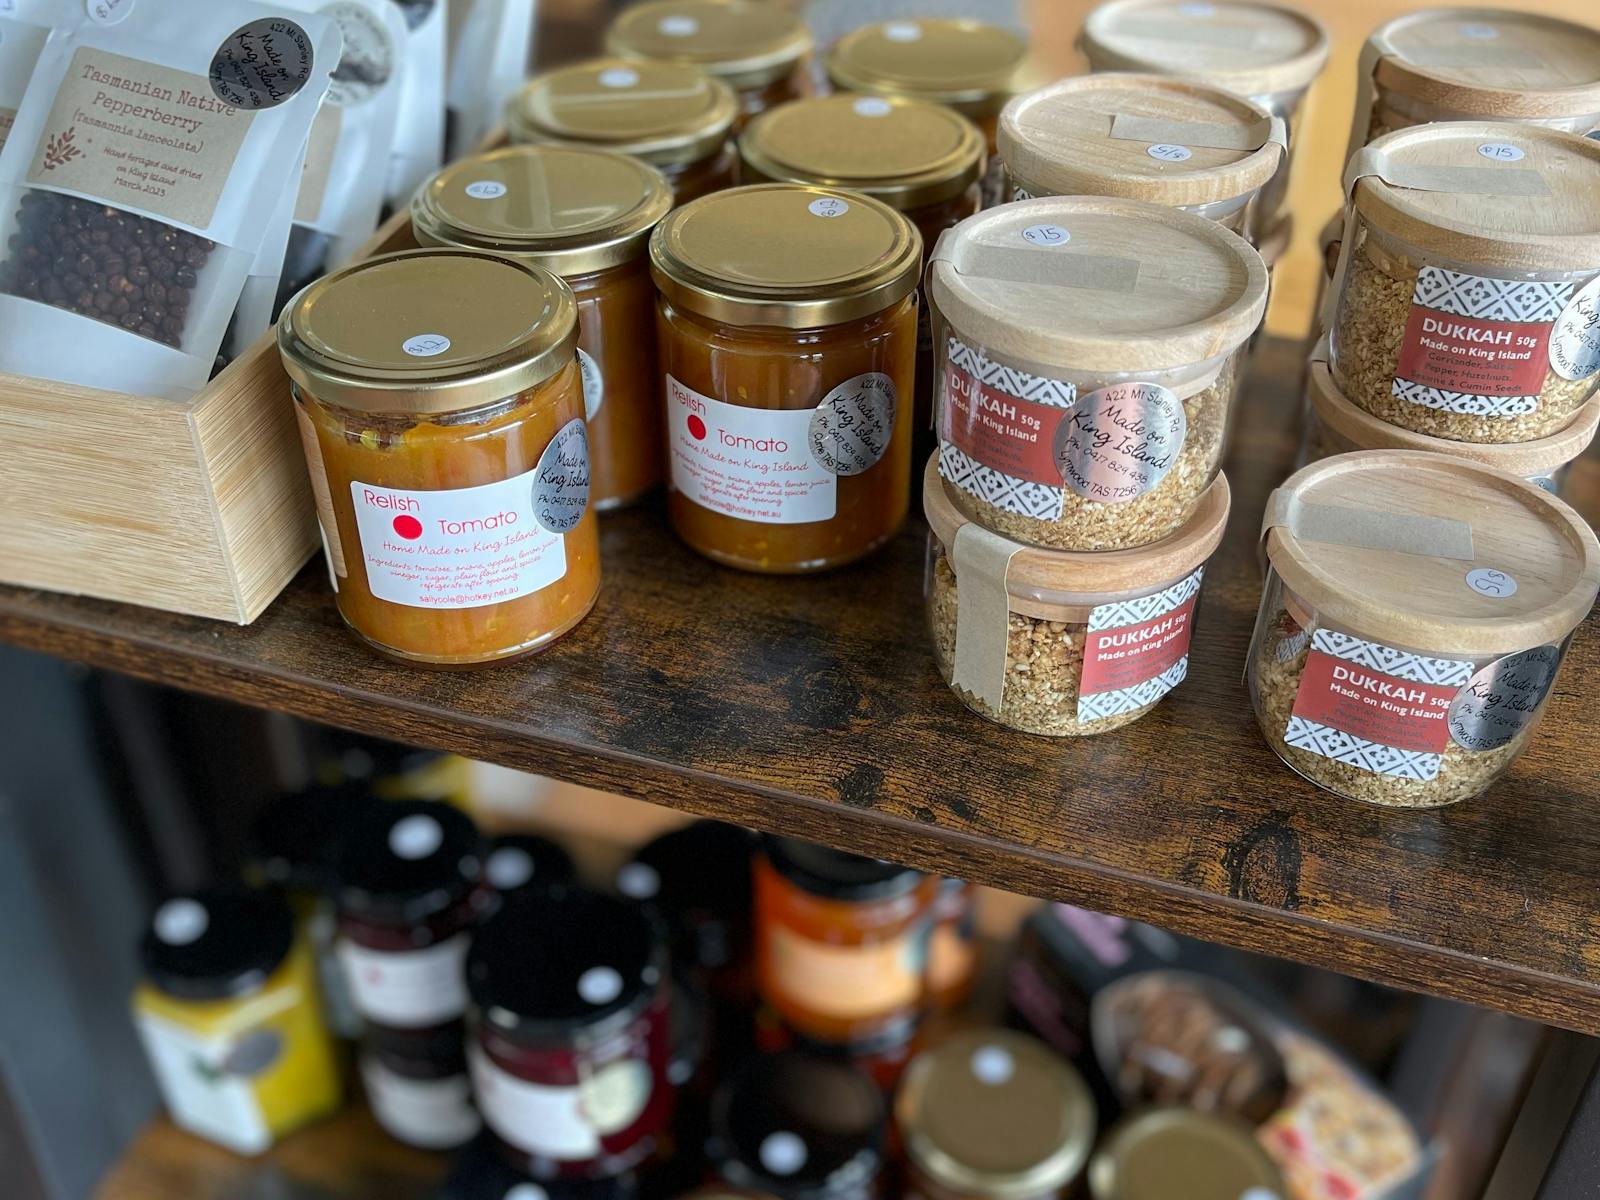 An array of local condiments including dukkah, relish, chutneys and jams